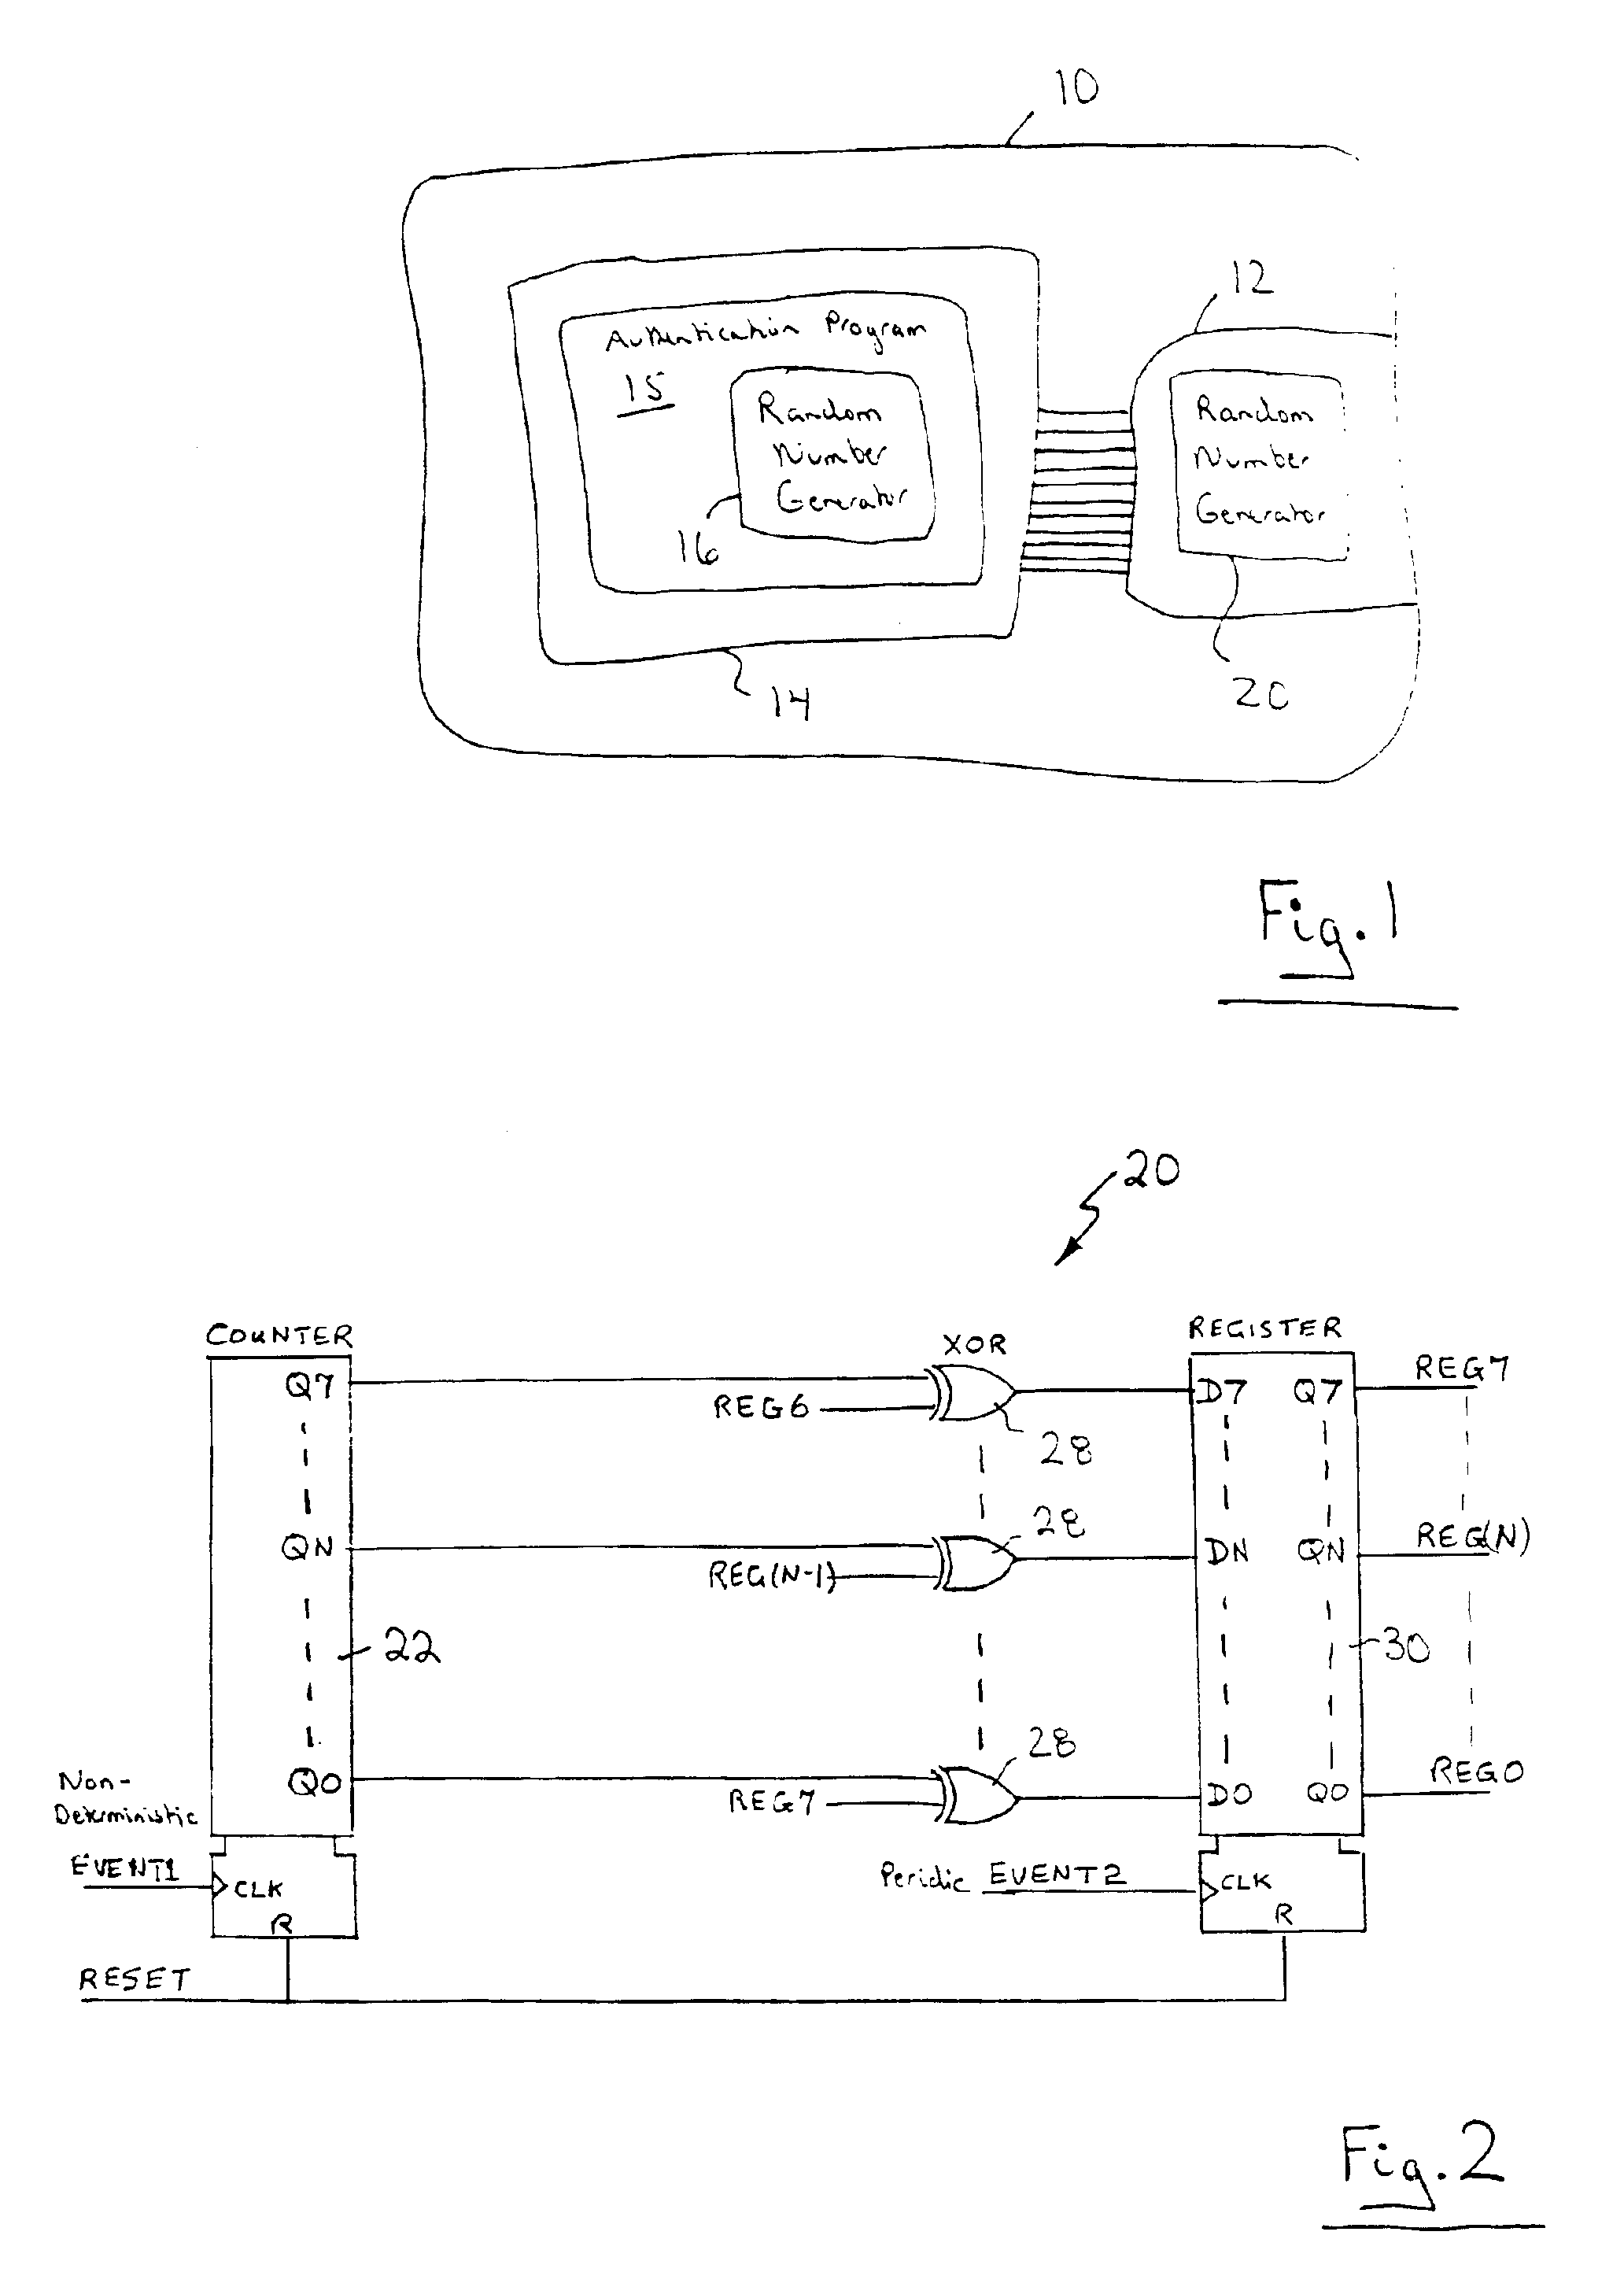 Removable hardware device authentication system and method